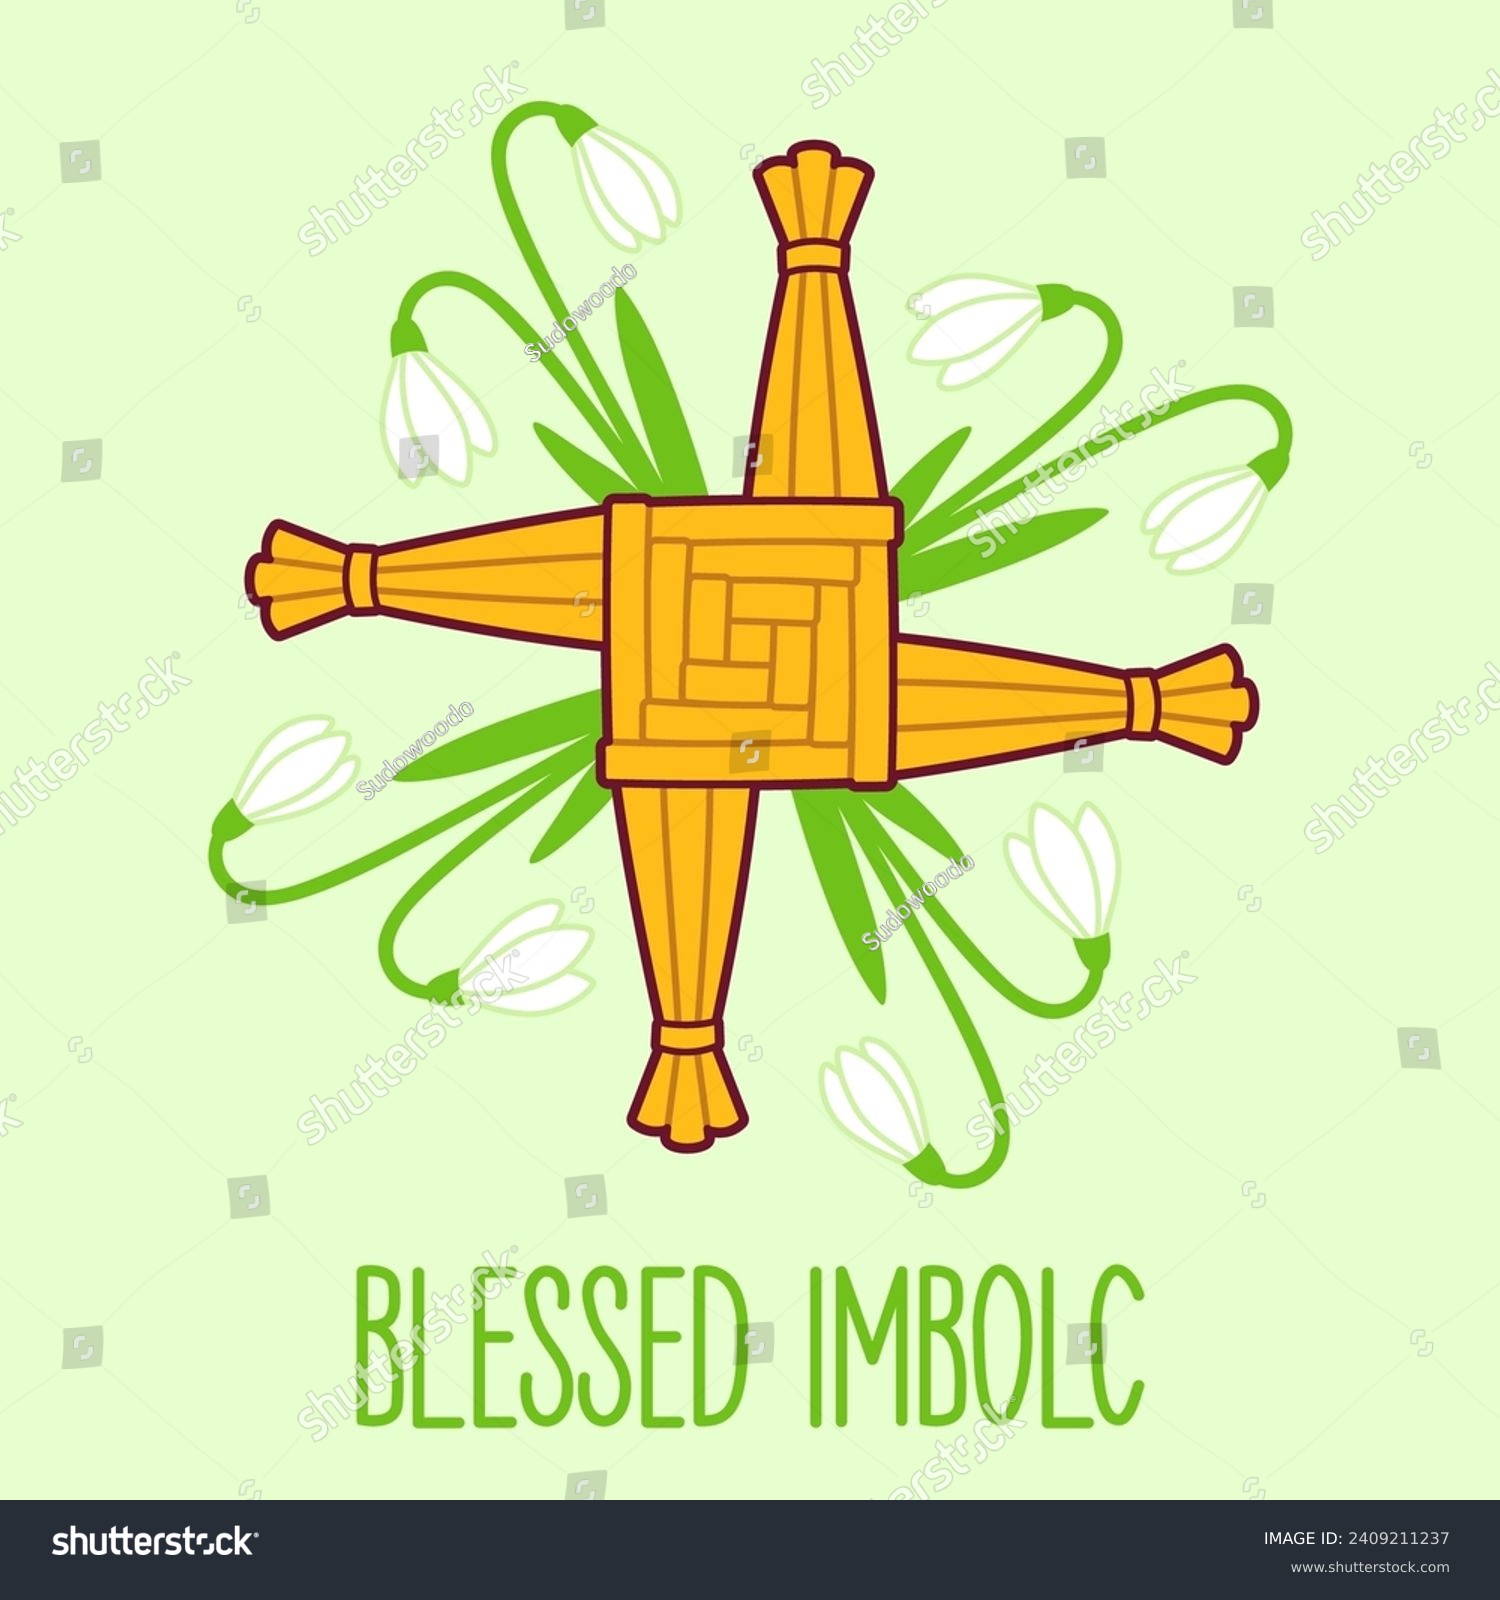 SVG of Blessed Imbolc greeting card, pagan spring holiday. Saint Brigid's cross with snowdrop flowers. Vector illustration.  svg